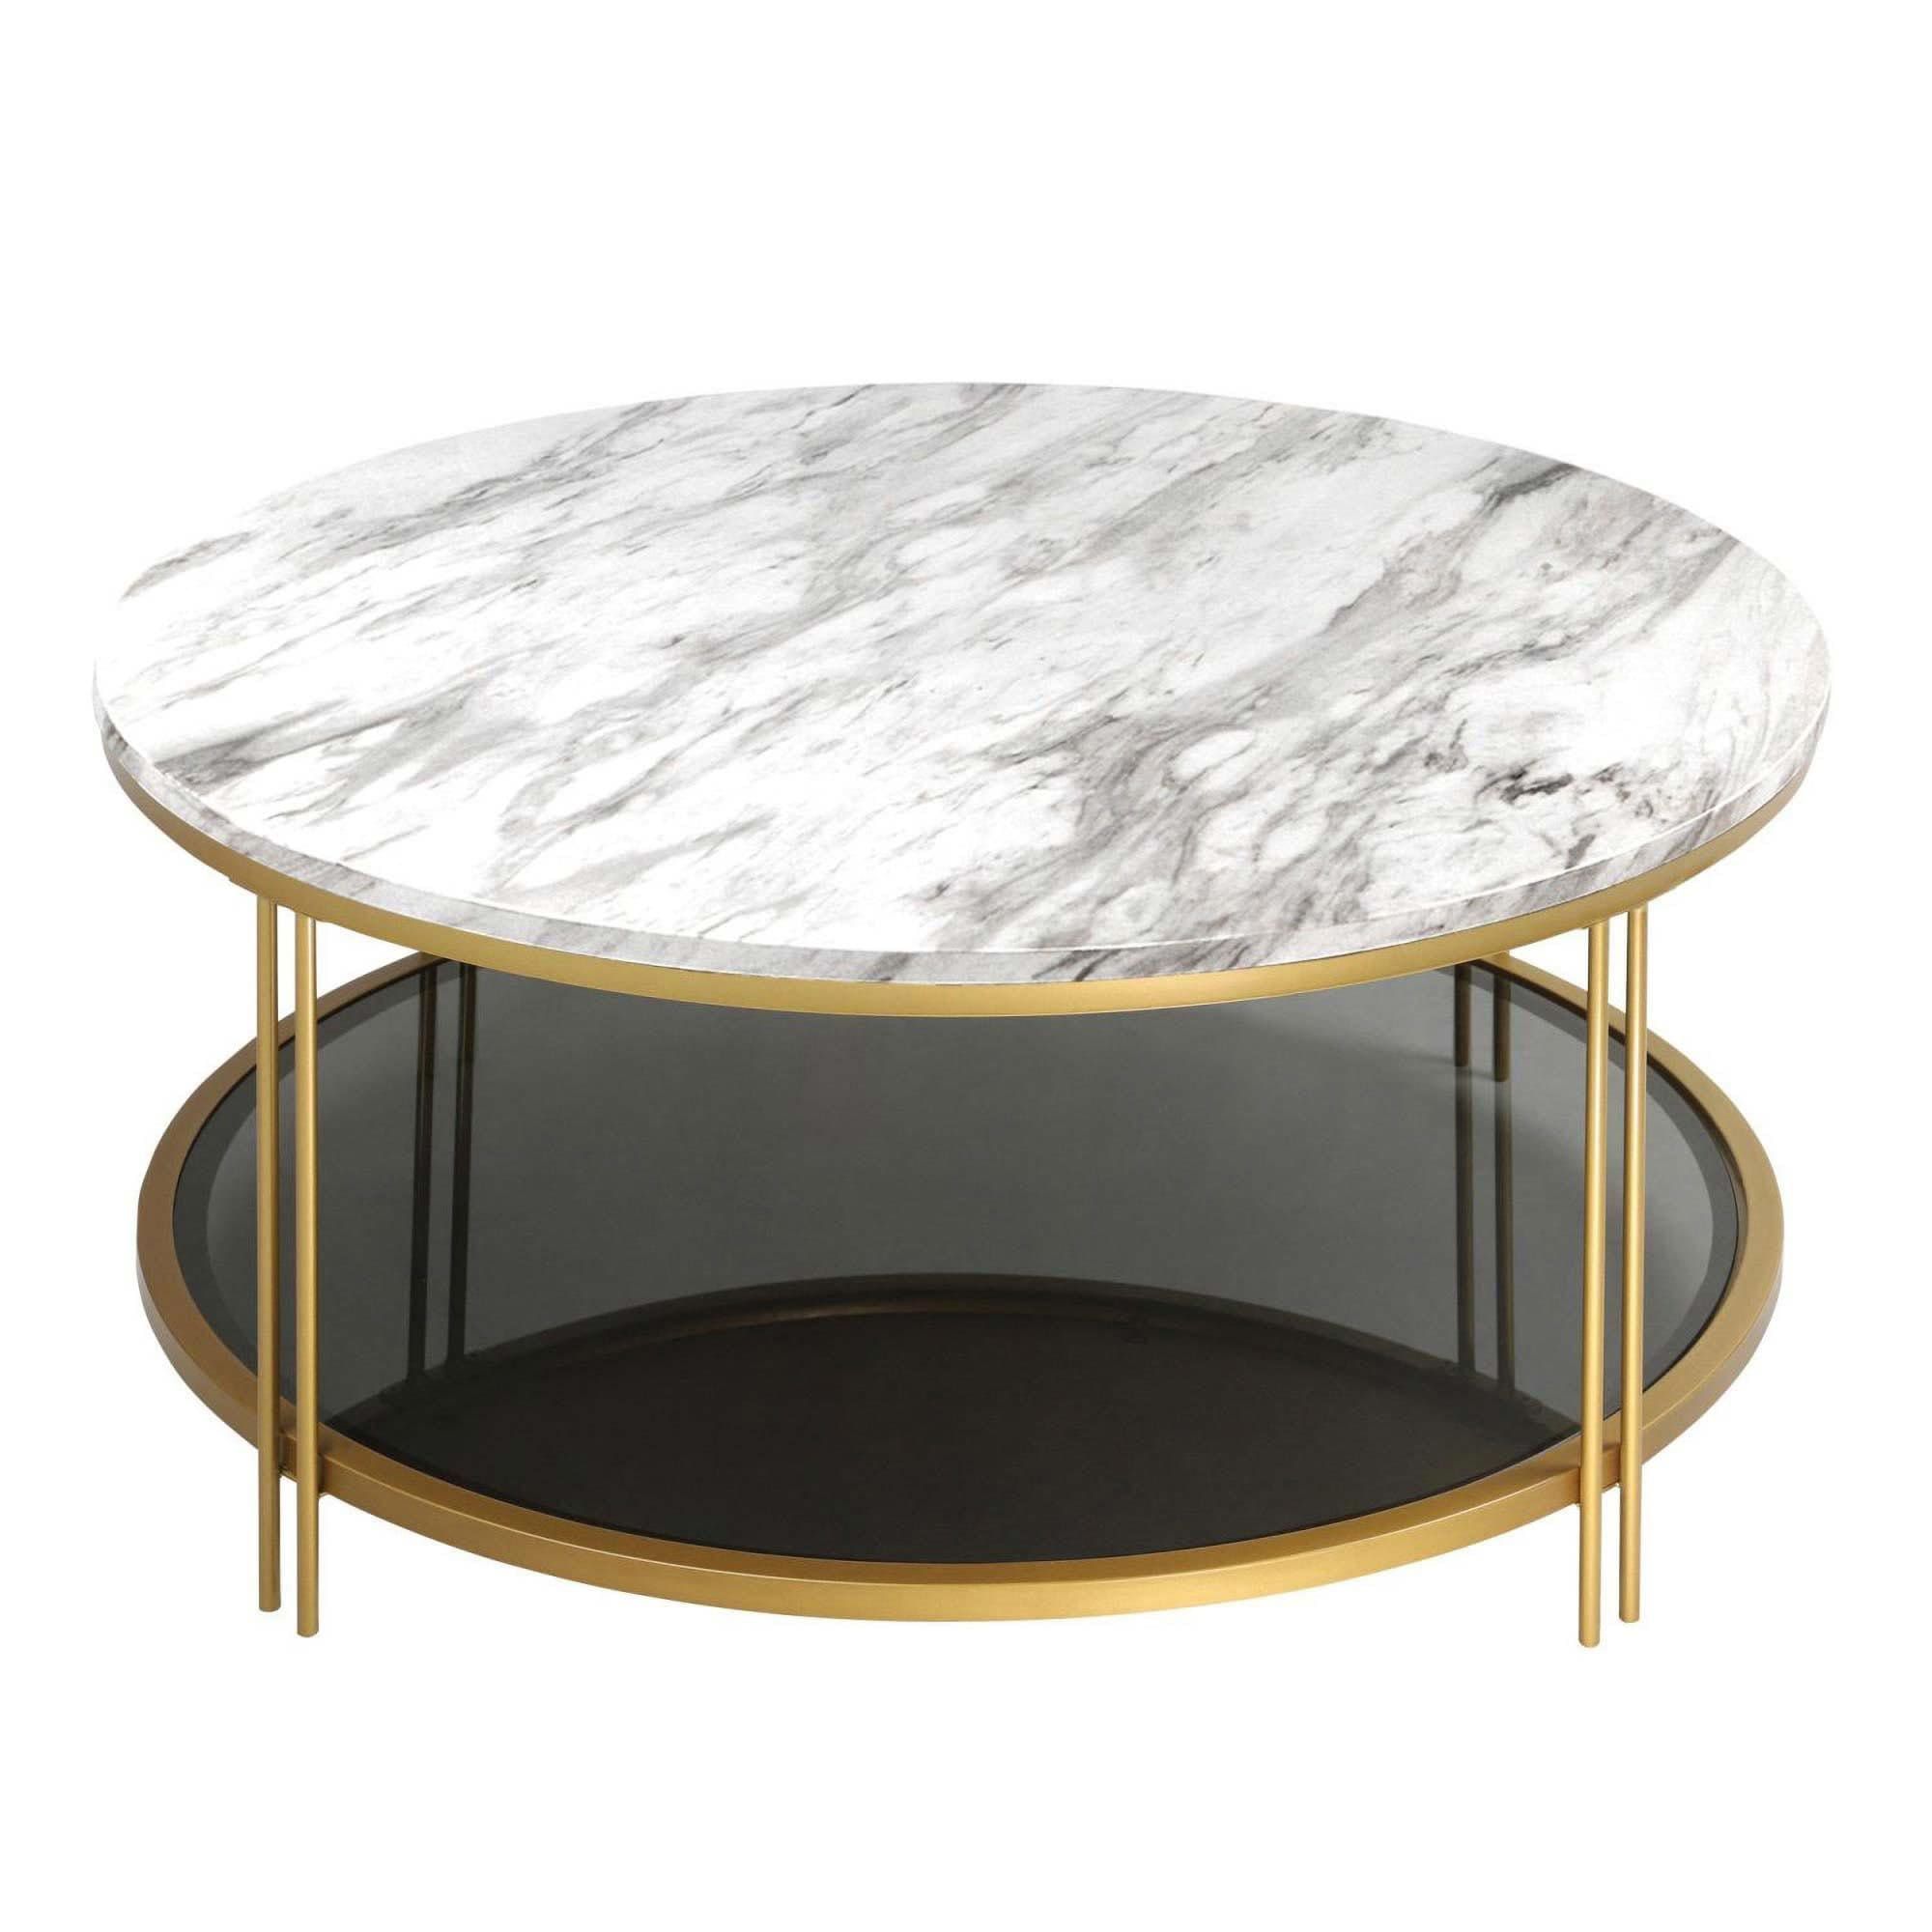 Uolfin Hera Marble Paper Top With Pu Finish Faux Marble Modern Coffee Table  With Storage In The Coffee Tables Department At Lowes With Faux Marble Top Coffee Tables (View 4 of 20)